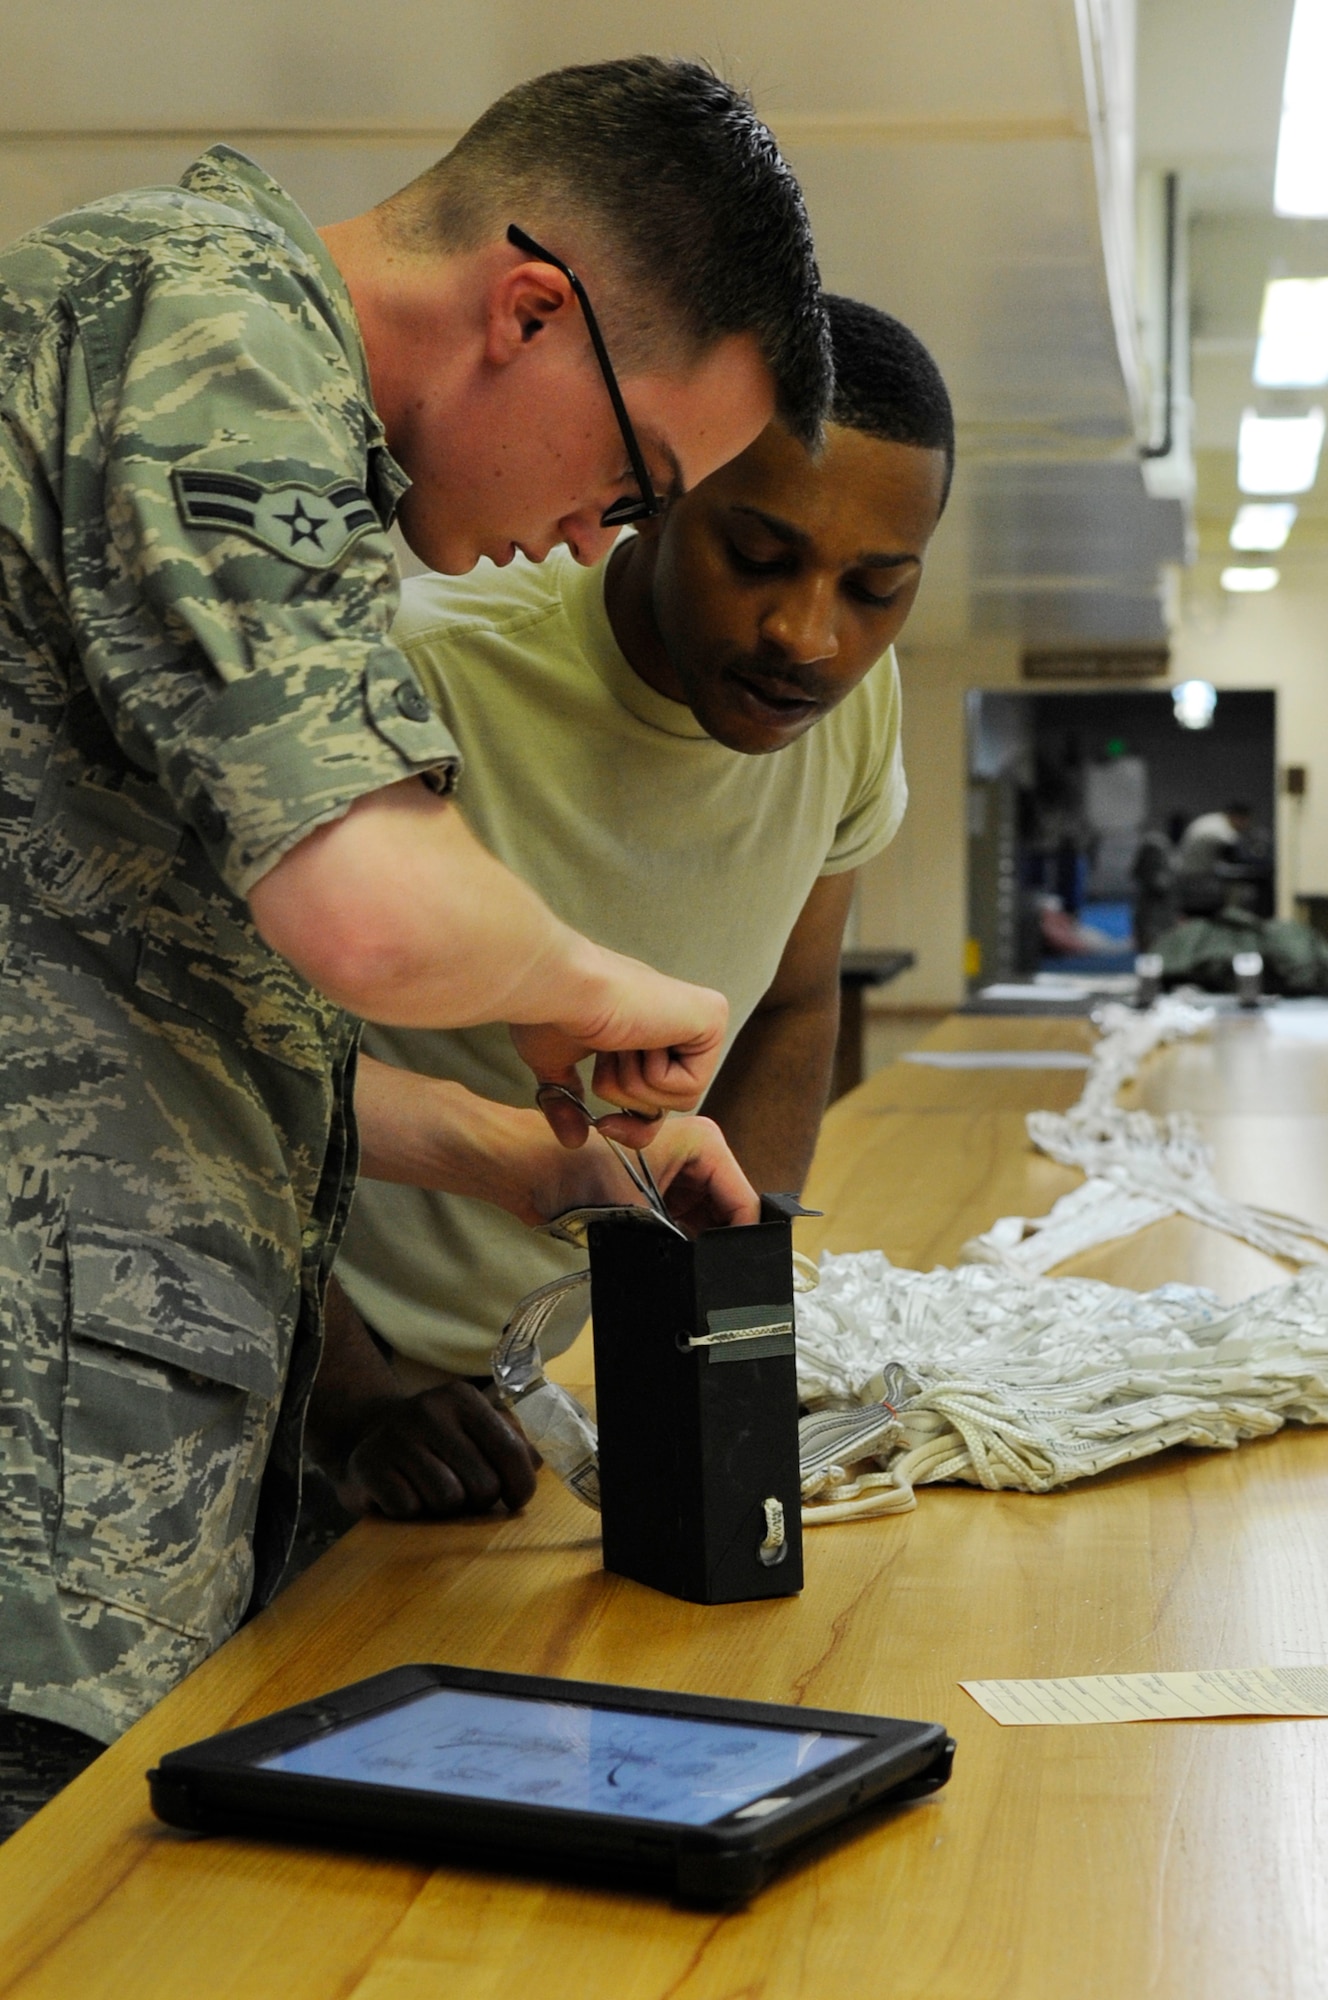 U.S. Air Force Airman 1st Class Stephen Carter, 18th Operations Support Squadron aircrew flight equipment packs a drogue parachute while Staff Sgt. Marques Bones, 18th OSS aircrew flight equipment specialist inspects his work on Kadena Air Base, Japan, May 21, 2014. Each parachute goes through up to seven in-process inspections, as well as a final quality control inspection to maintain safety standards. (U.S. Air Force photo by Senior Airman Marcus Morris)